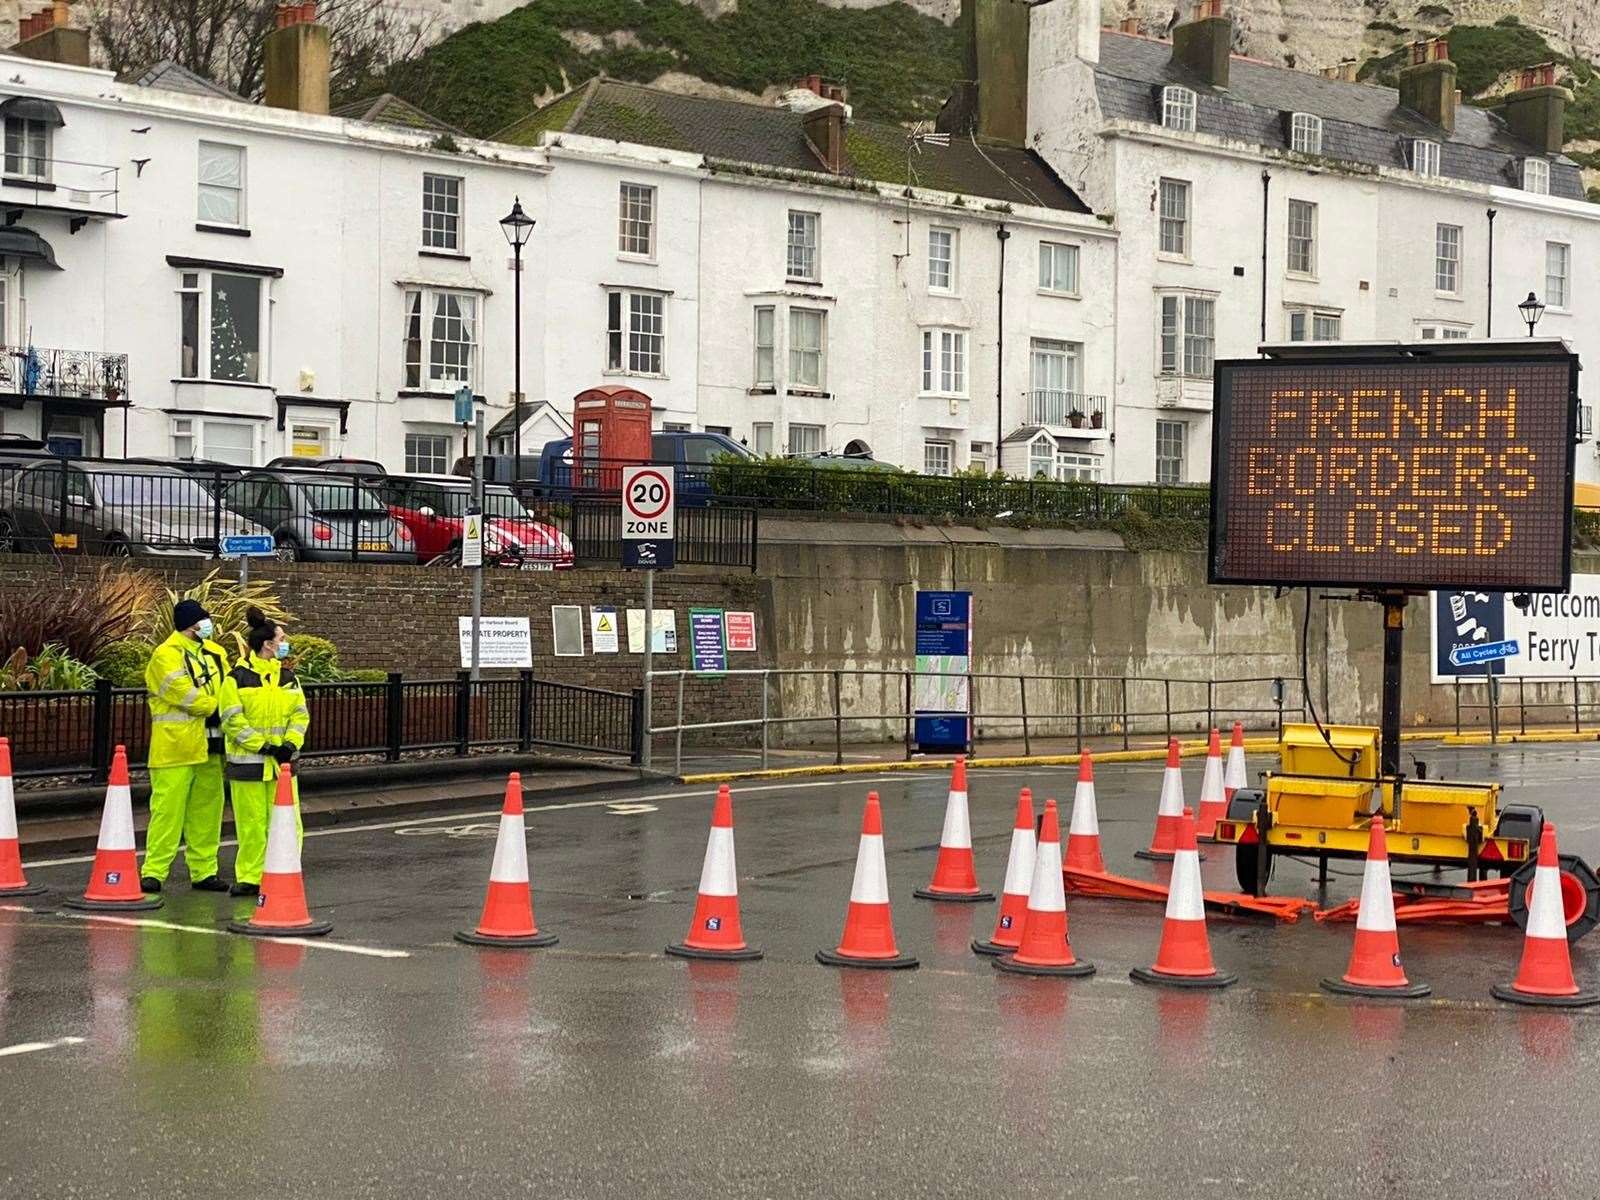 There was more chaos to come as concern over the new Covid-19 strain led France to close its borders with the UK, leaving thousands of lorries stranded on Kent's roads. The entrance to the Port of Dover is pictured here.